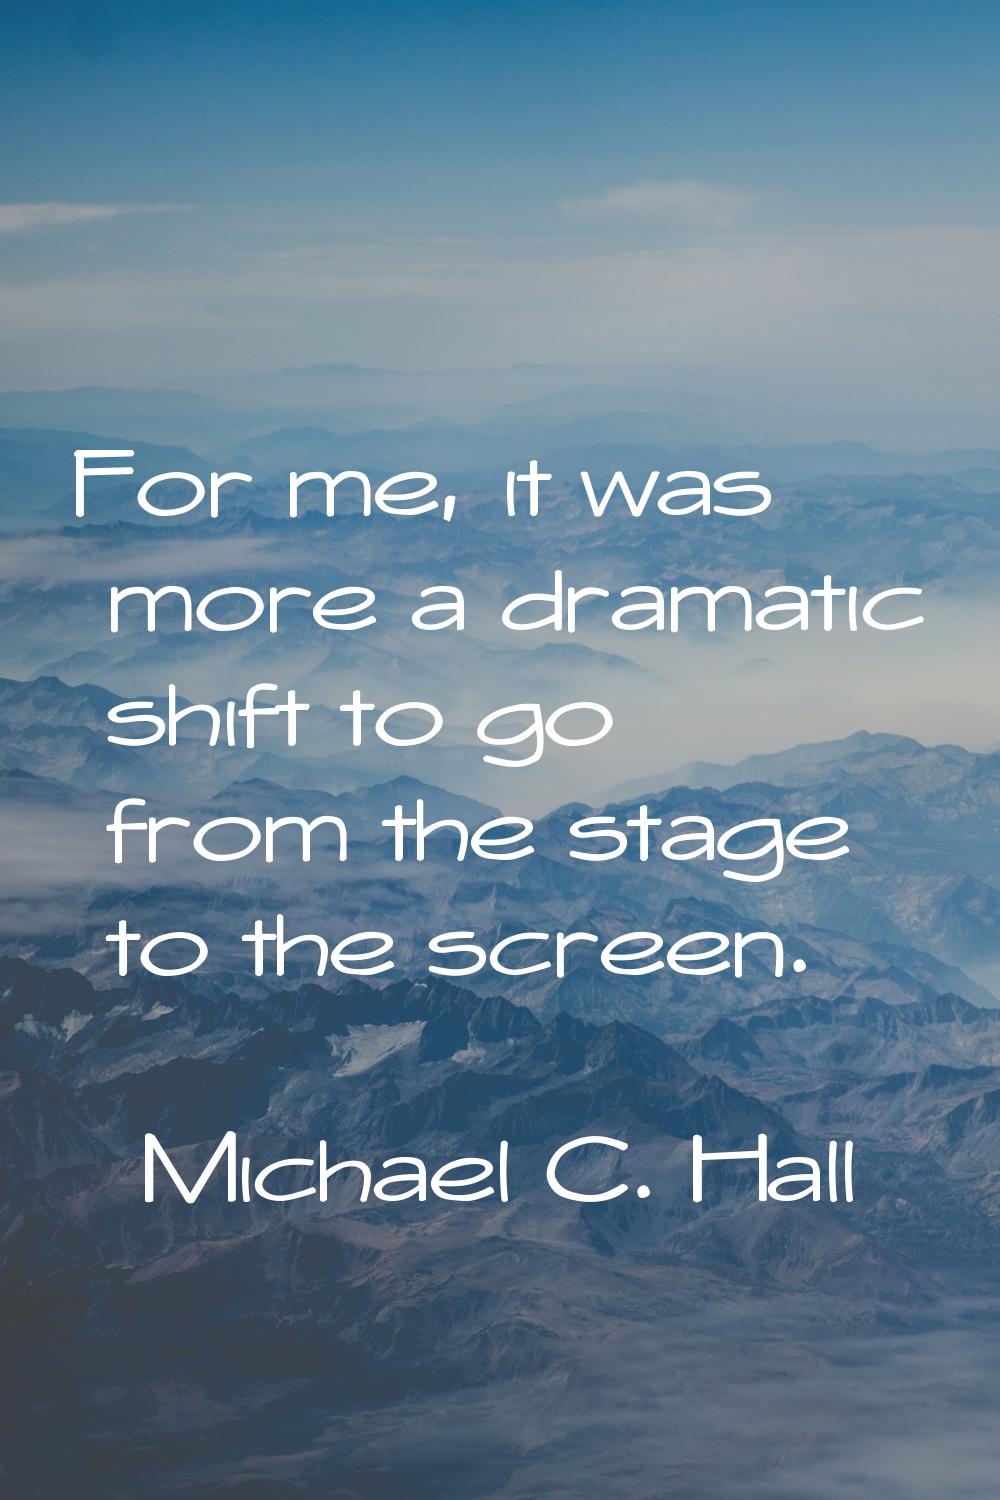 For me, it was more a dramatic shift to go from the stage to the screen.